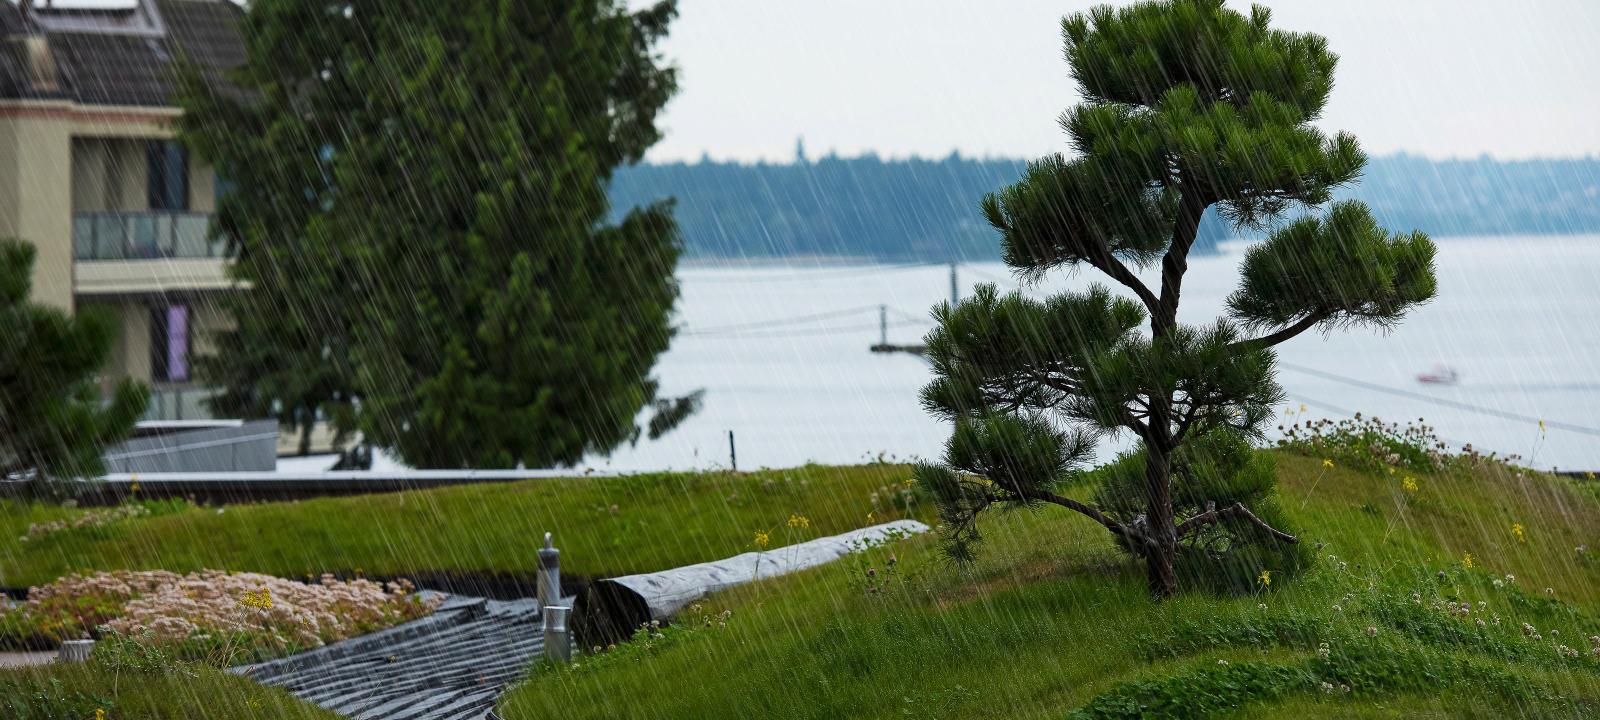 Roof garden with lawn and pine trees during rainfall